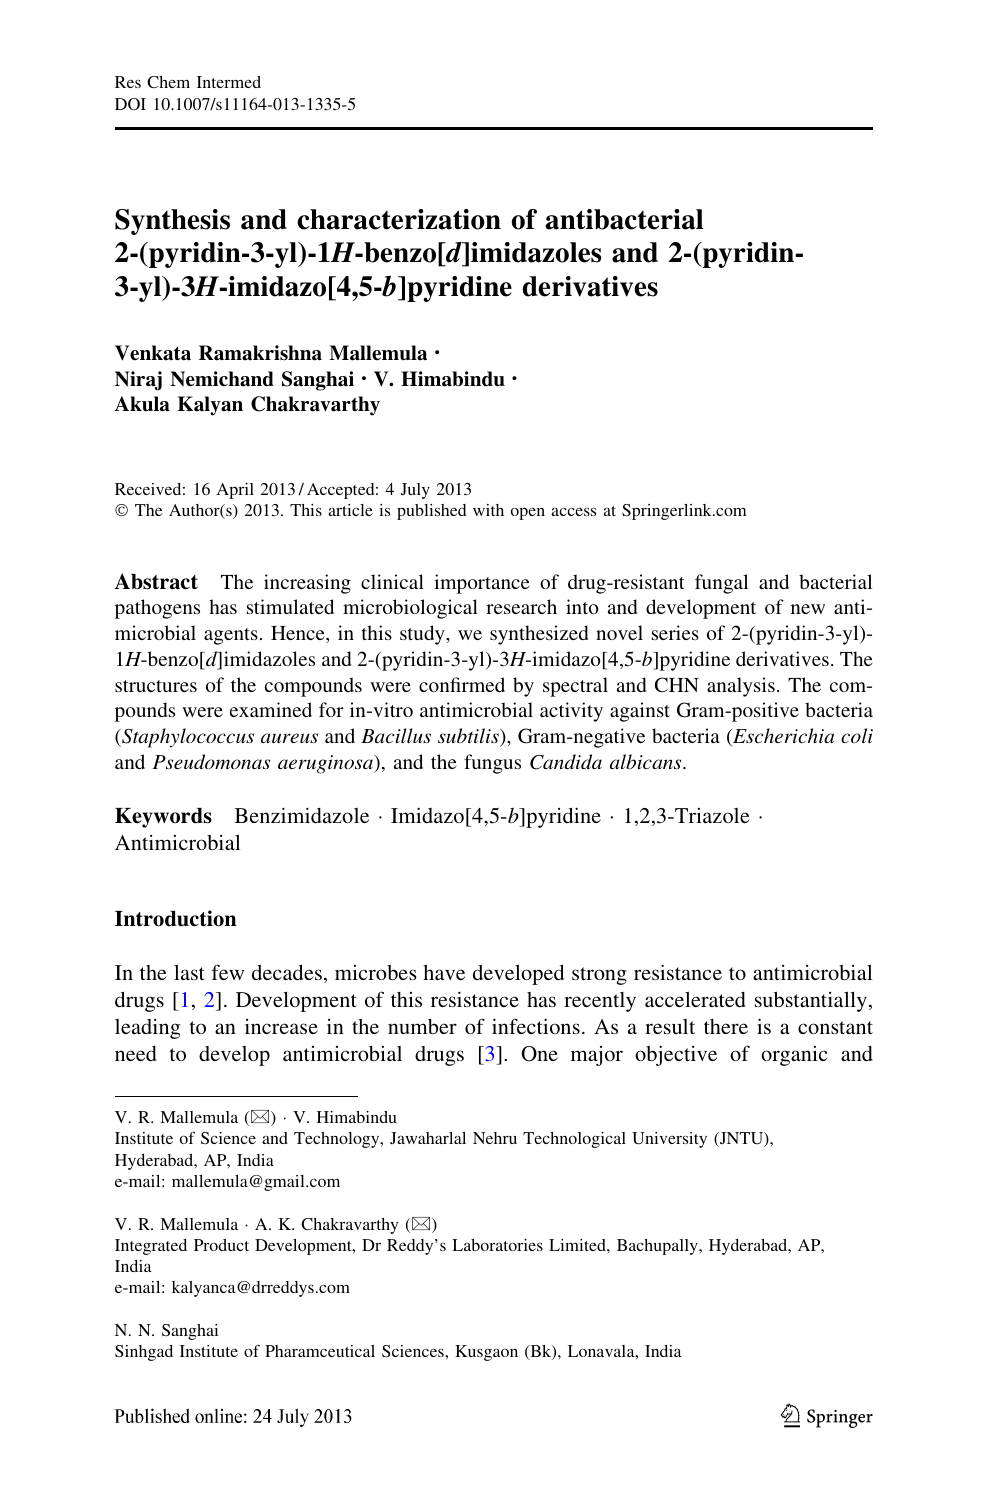 1-(Naphthylalkyl)-1H-imidazole derivatives, a new class of anticonvulsant  agents | Journal of Medicinal Chemistry